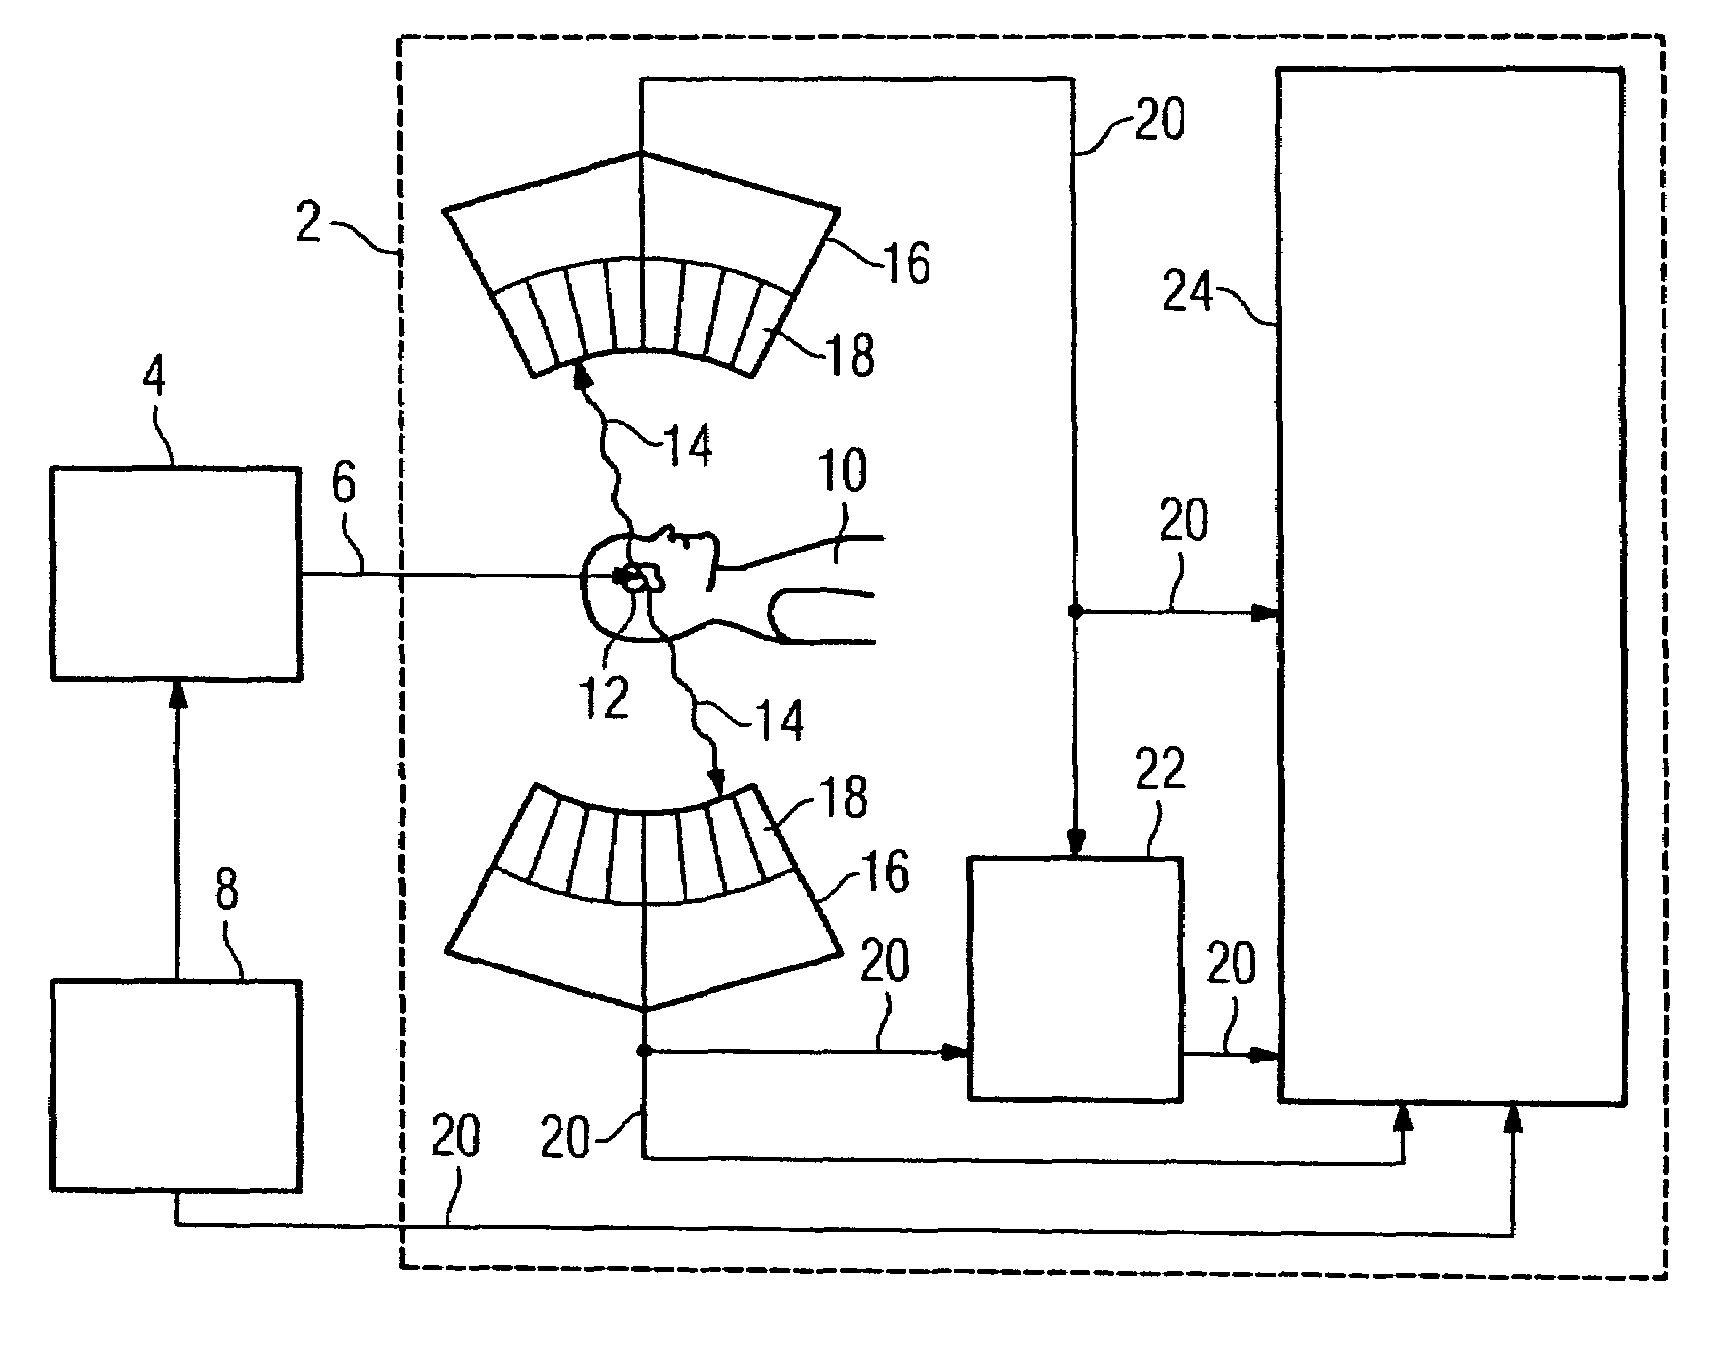 Device and method for locally resolved control of a radiation dose